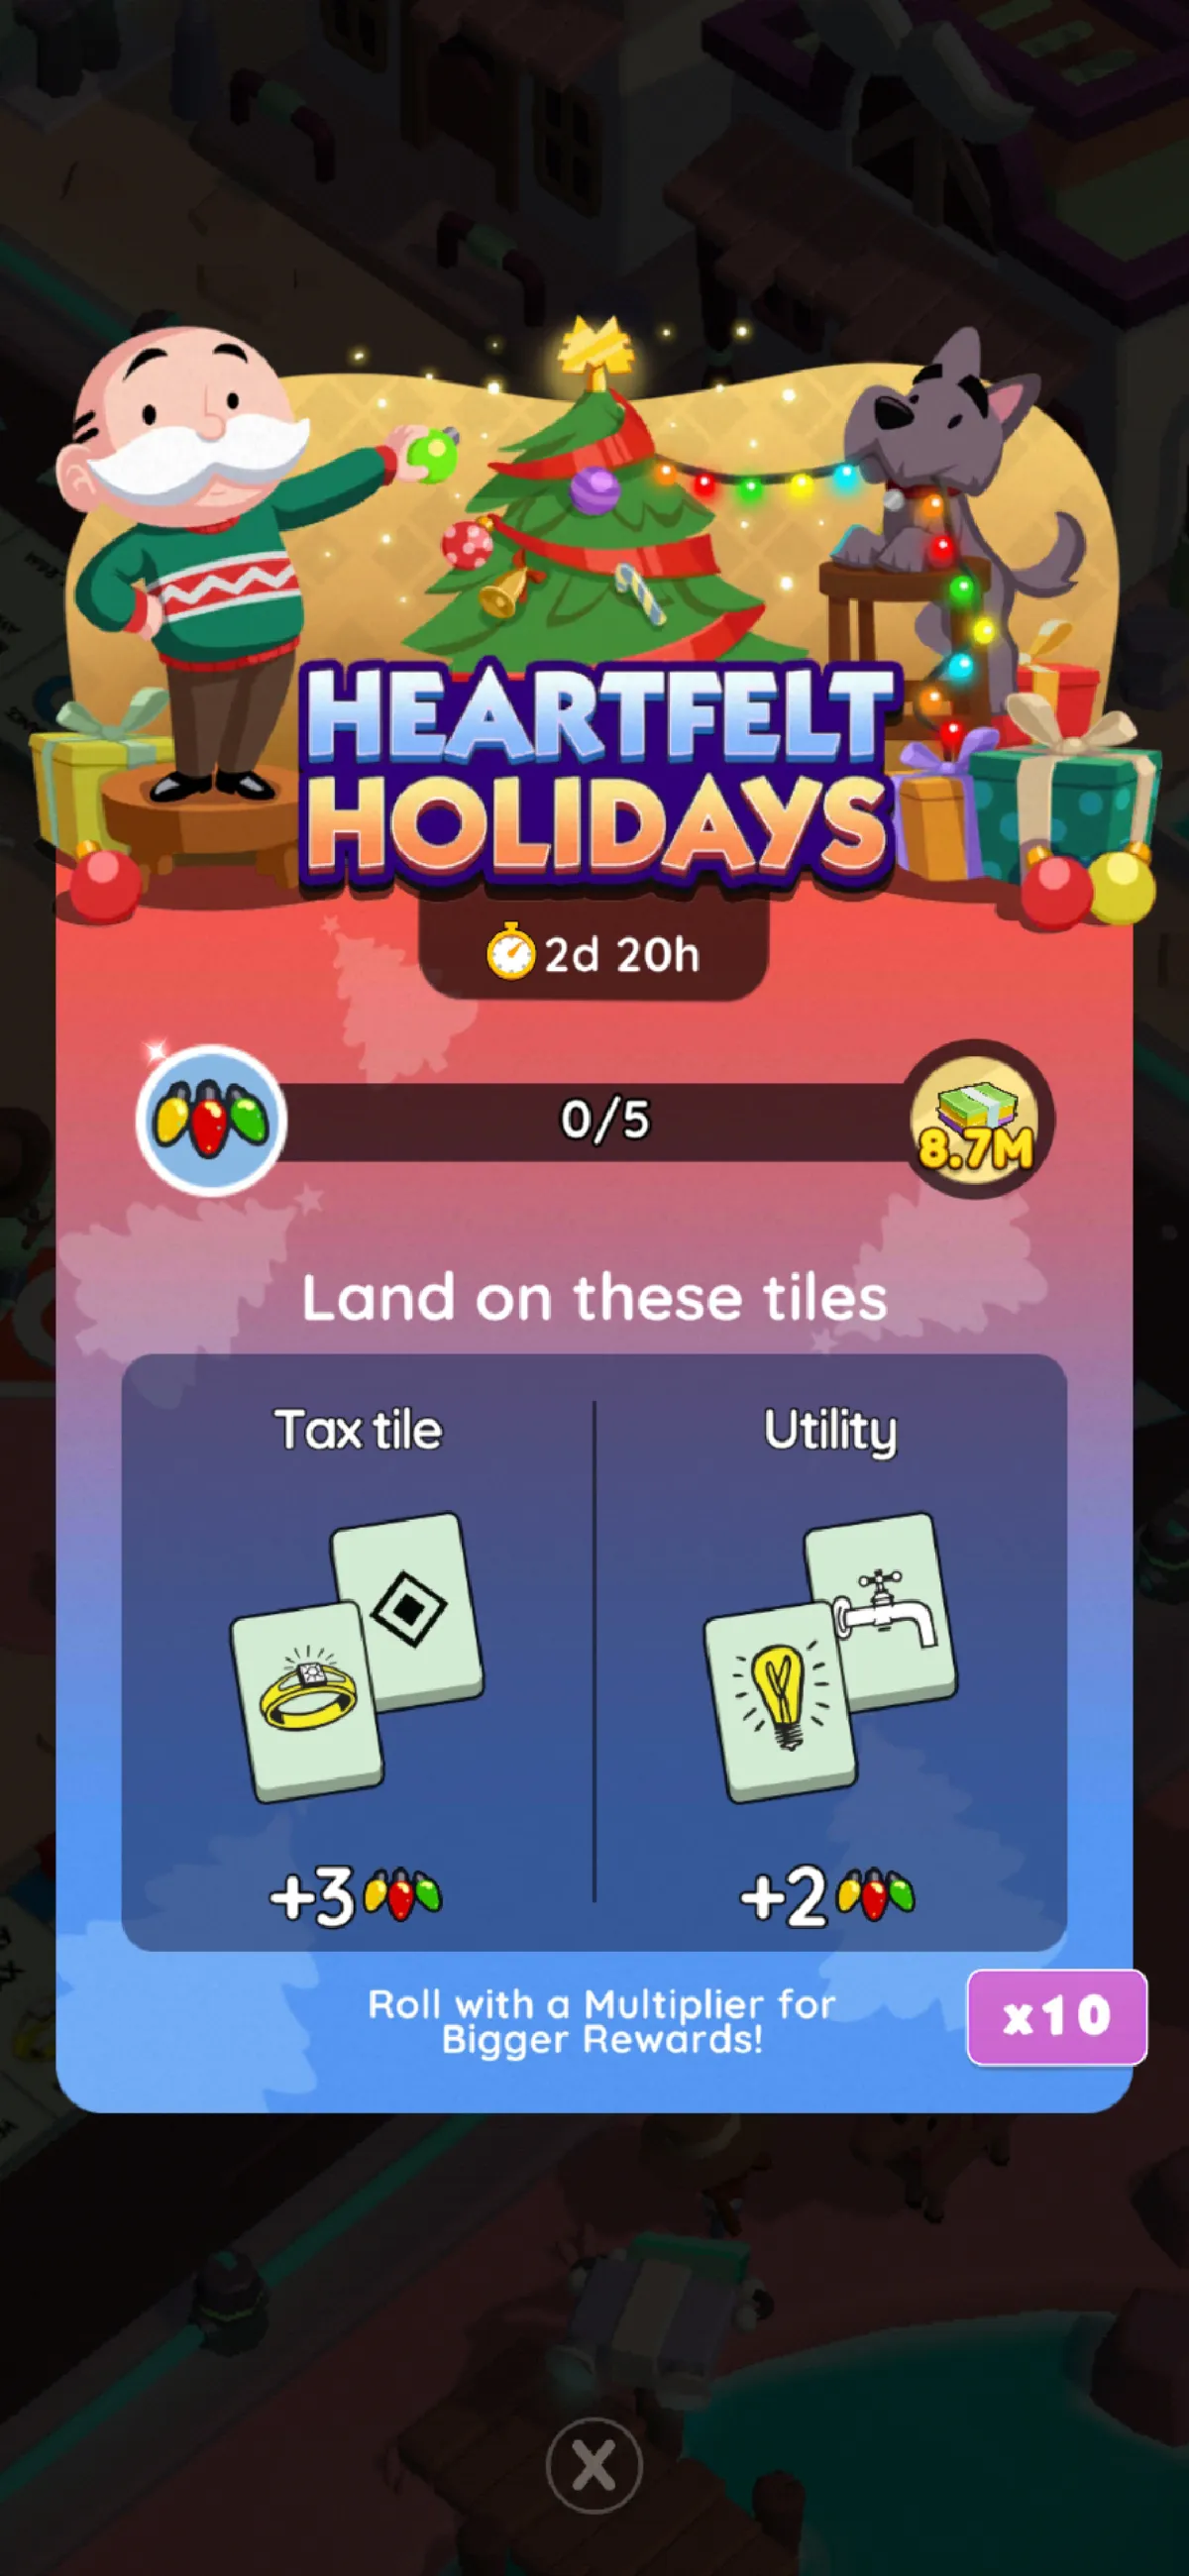 A header-sized image for the Heartfelt Holidays event in Monopoly GO. The image shows Rich Uncle Pennybags and a dog decorating a Christmas tree with lights. The article this image is a part of goes through all the rewards, milestones, and prizes you can get for the Heartfelt Holidays event in Monopoly GO.